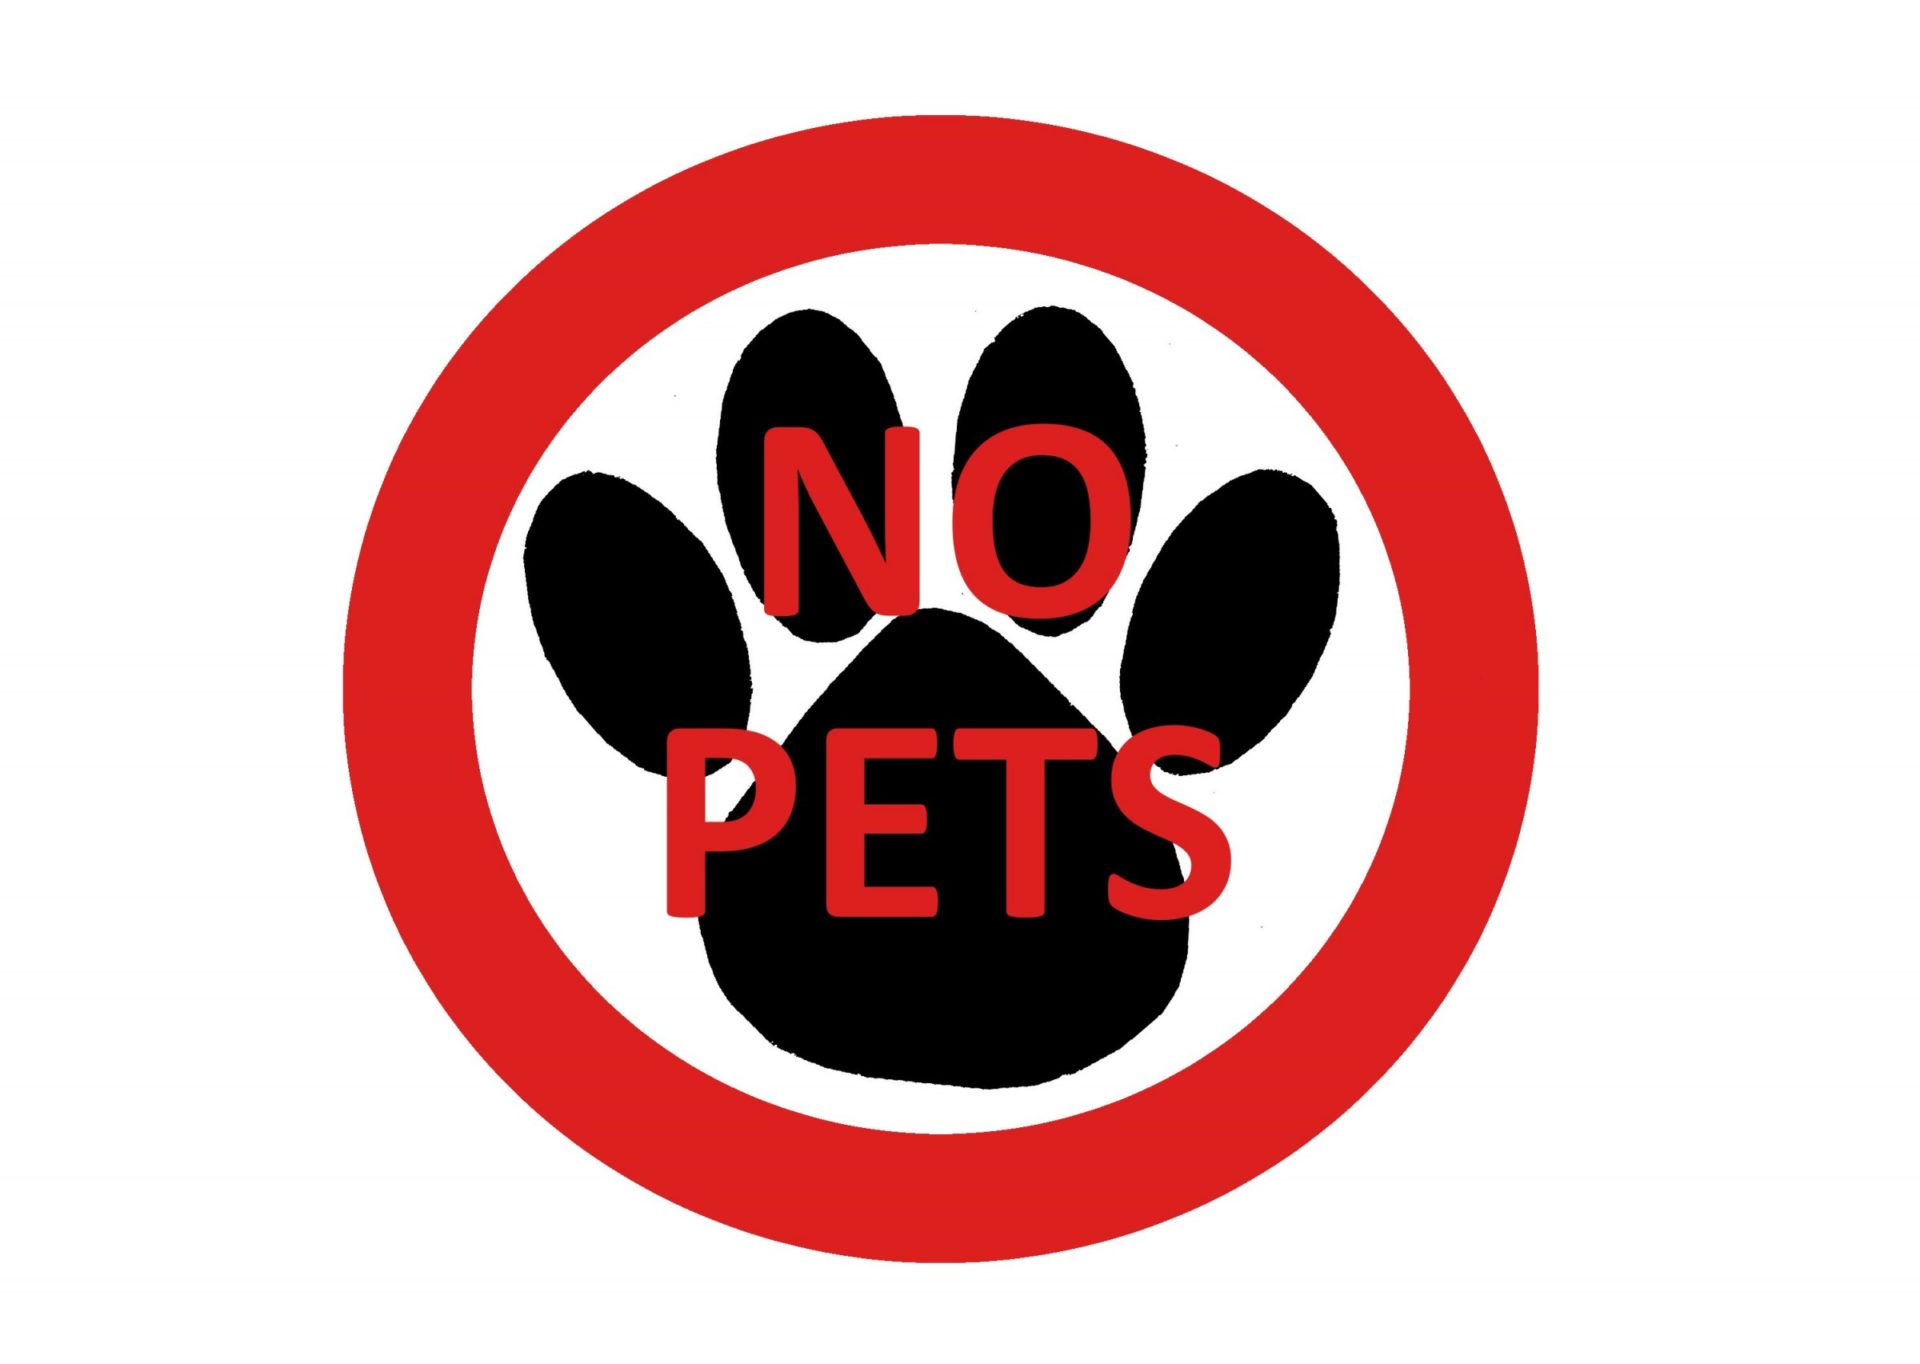 To “allow” or “not allow” pets in your apartments?